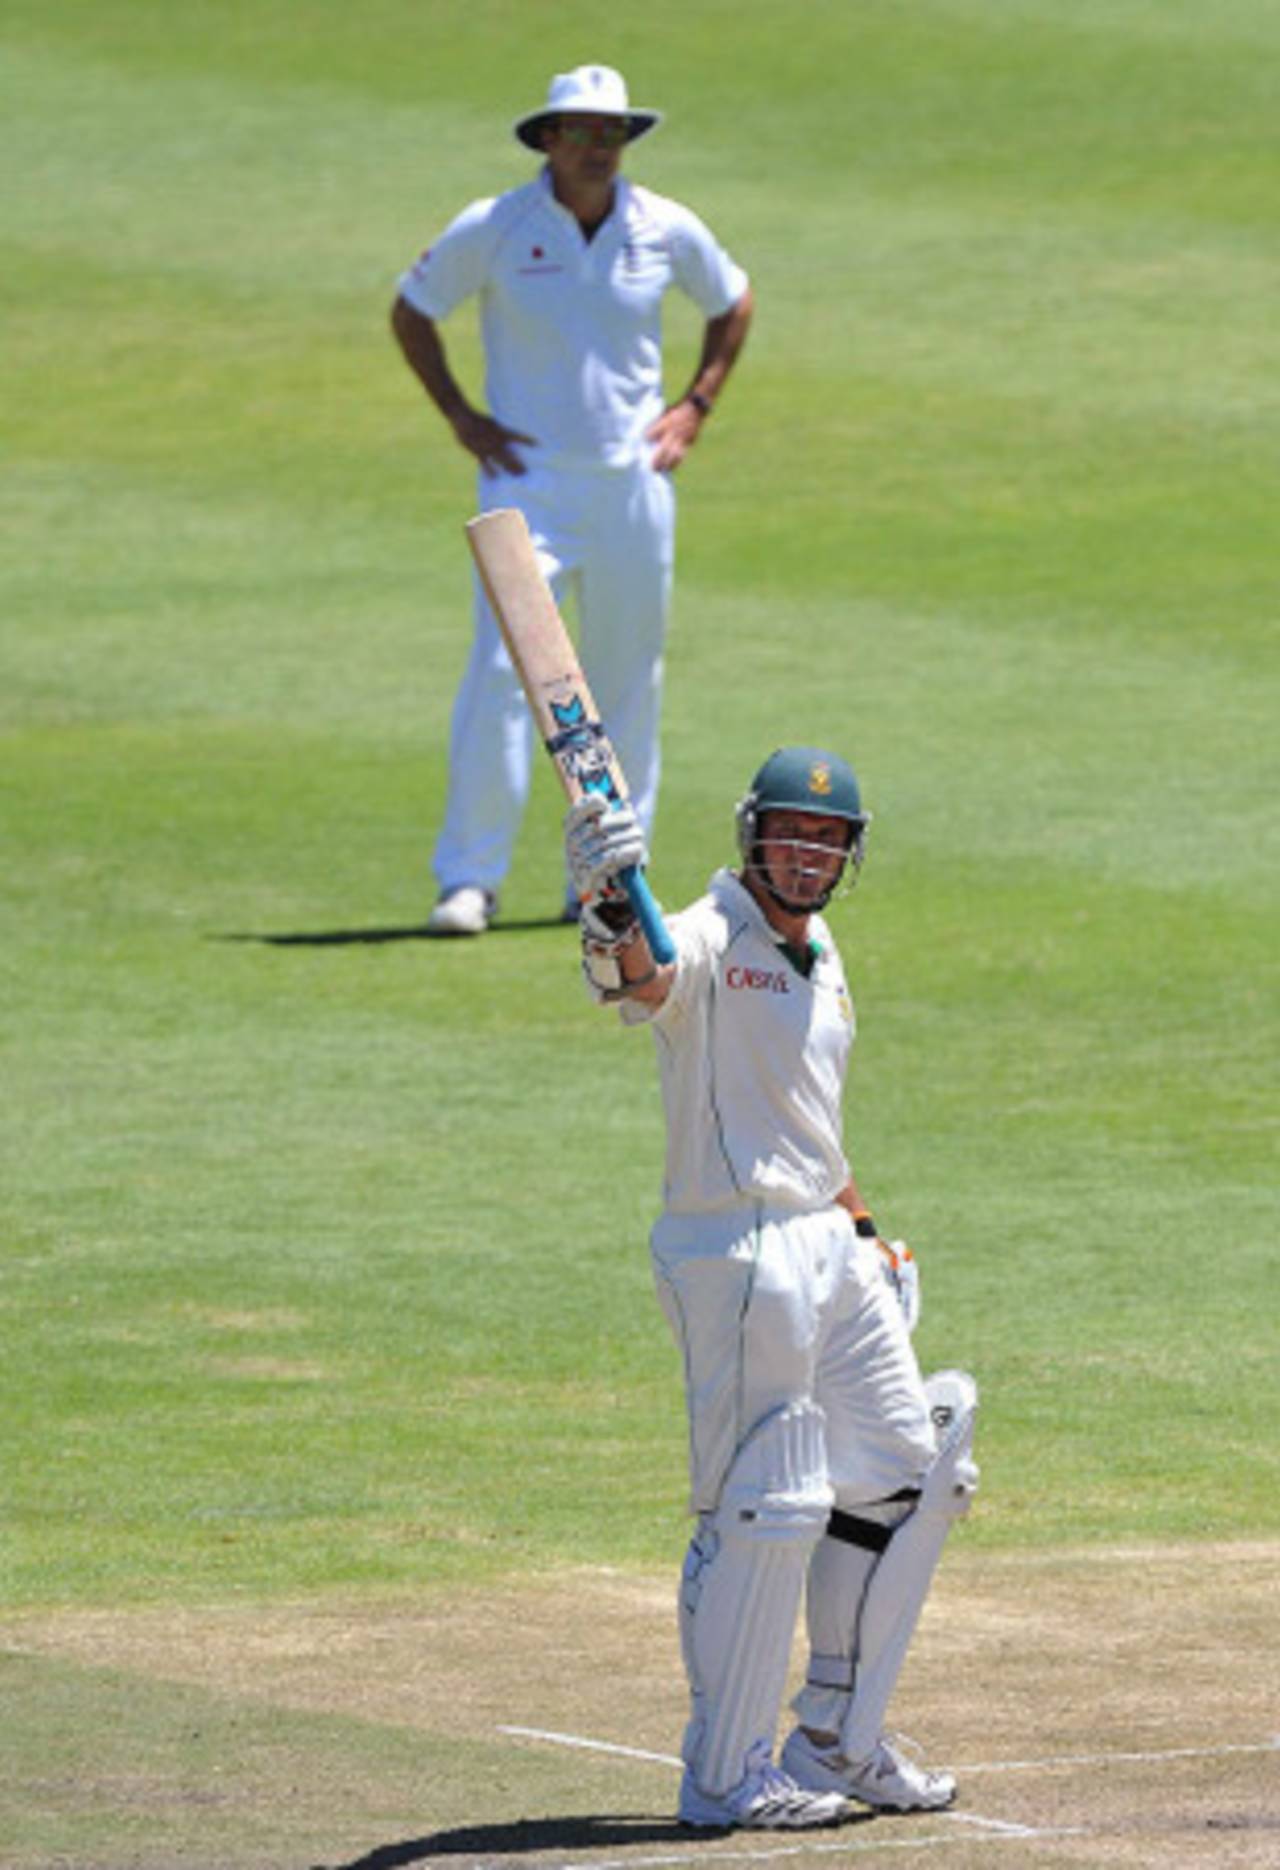 Graeme Smith celebrates his half-century as Andrew Strauss looks on, South Africa v England, 3rd Test, Cape Town, January 5, 2010